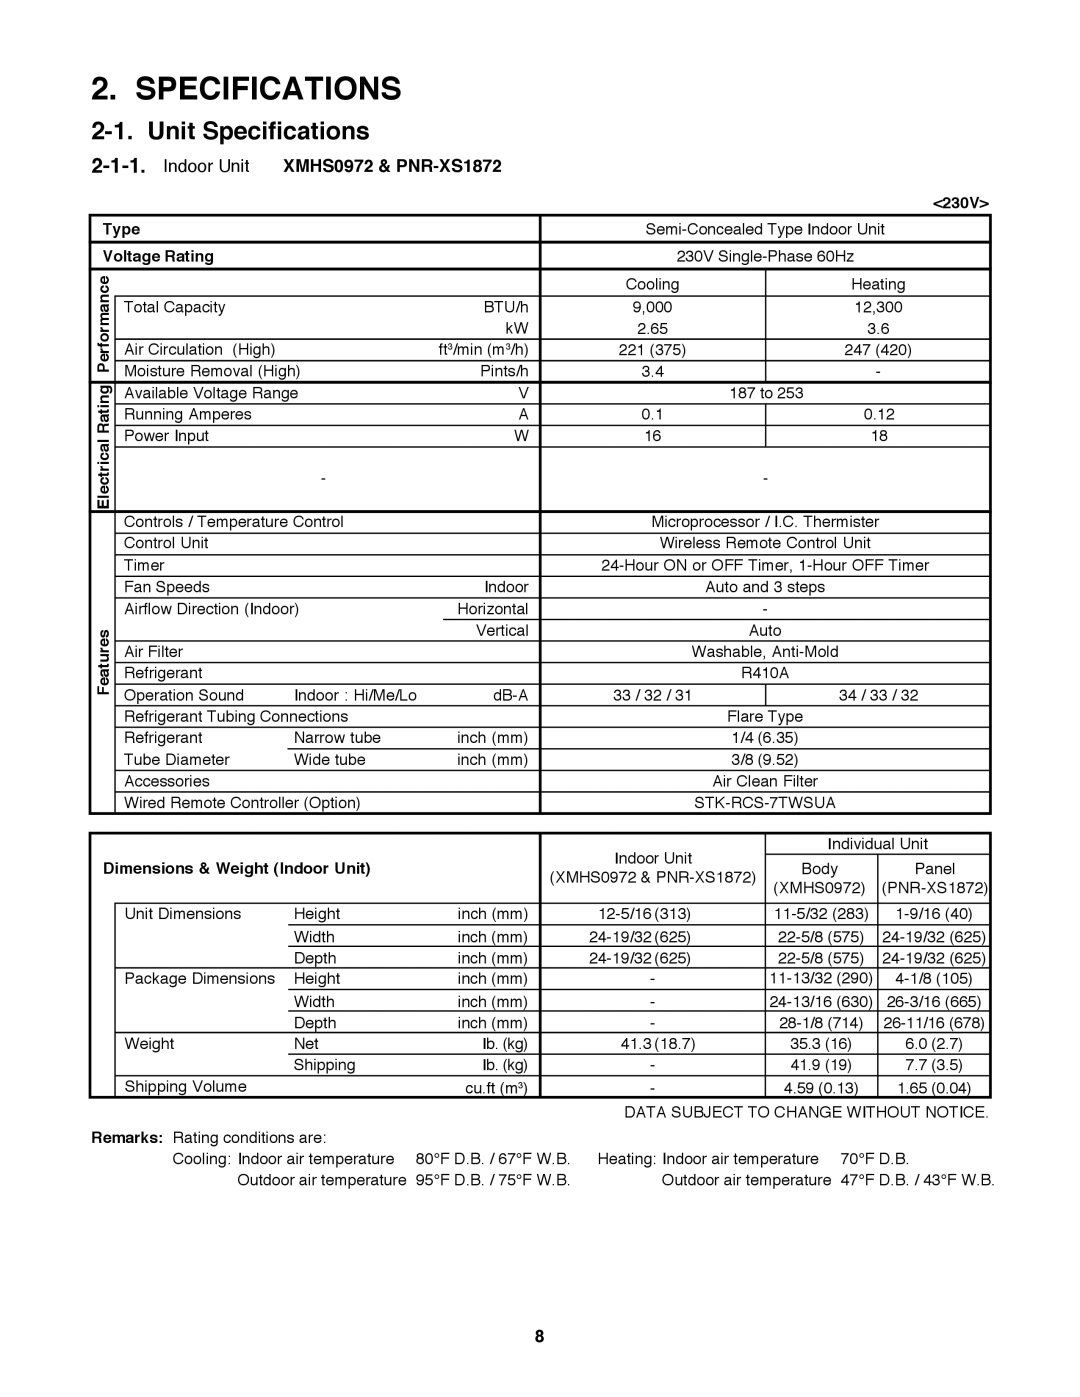 Sanyo XMHS1272 service manual Unit Specifications, Indoor Unit XMHS0972 & PNR-XS1872, 230V, Type, Voltage Rating 